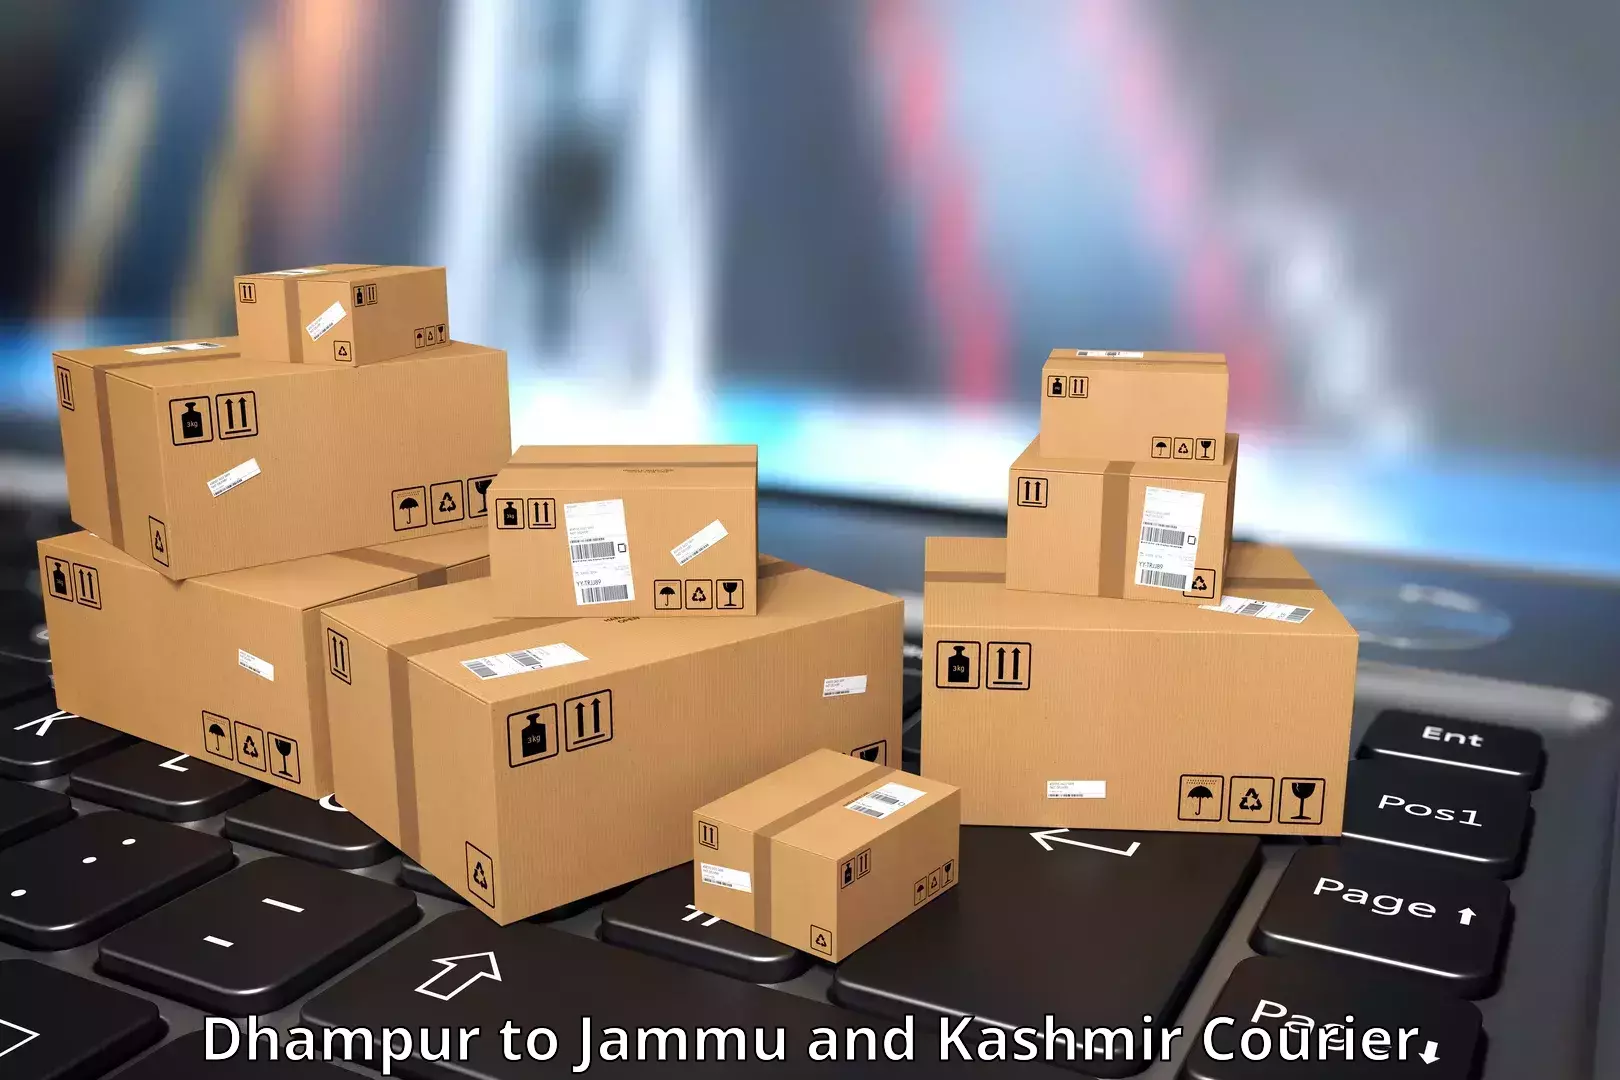 High-capacity shipping options Dhampur to Bandipur